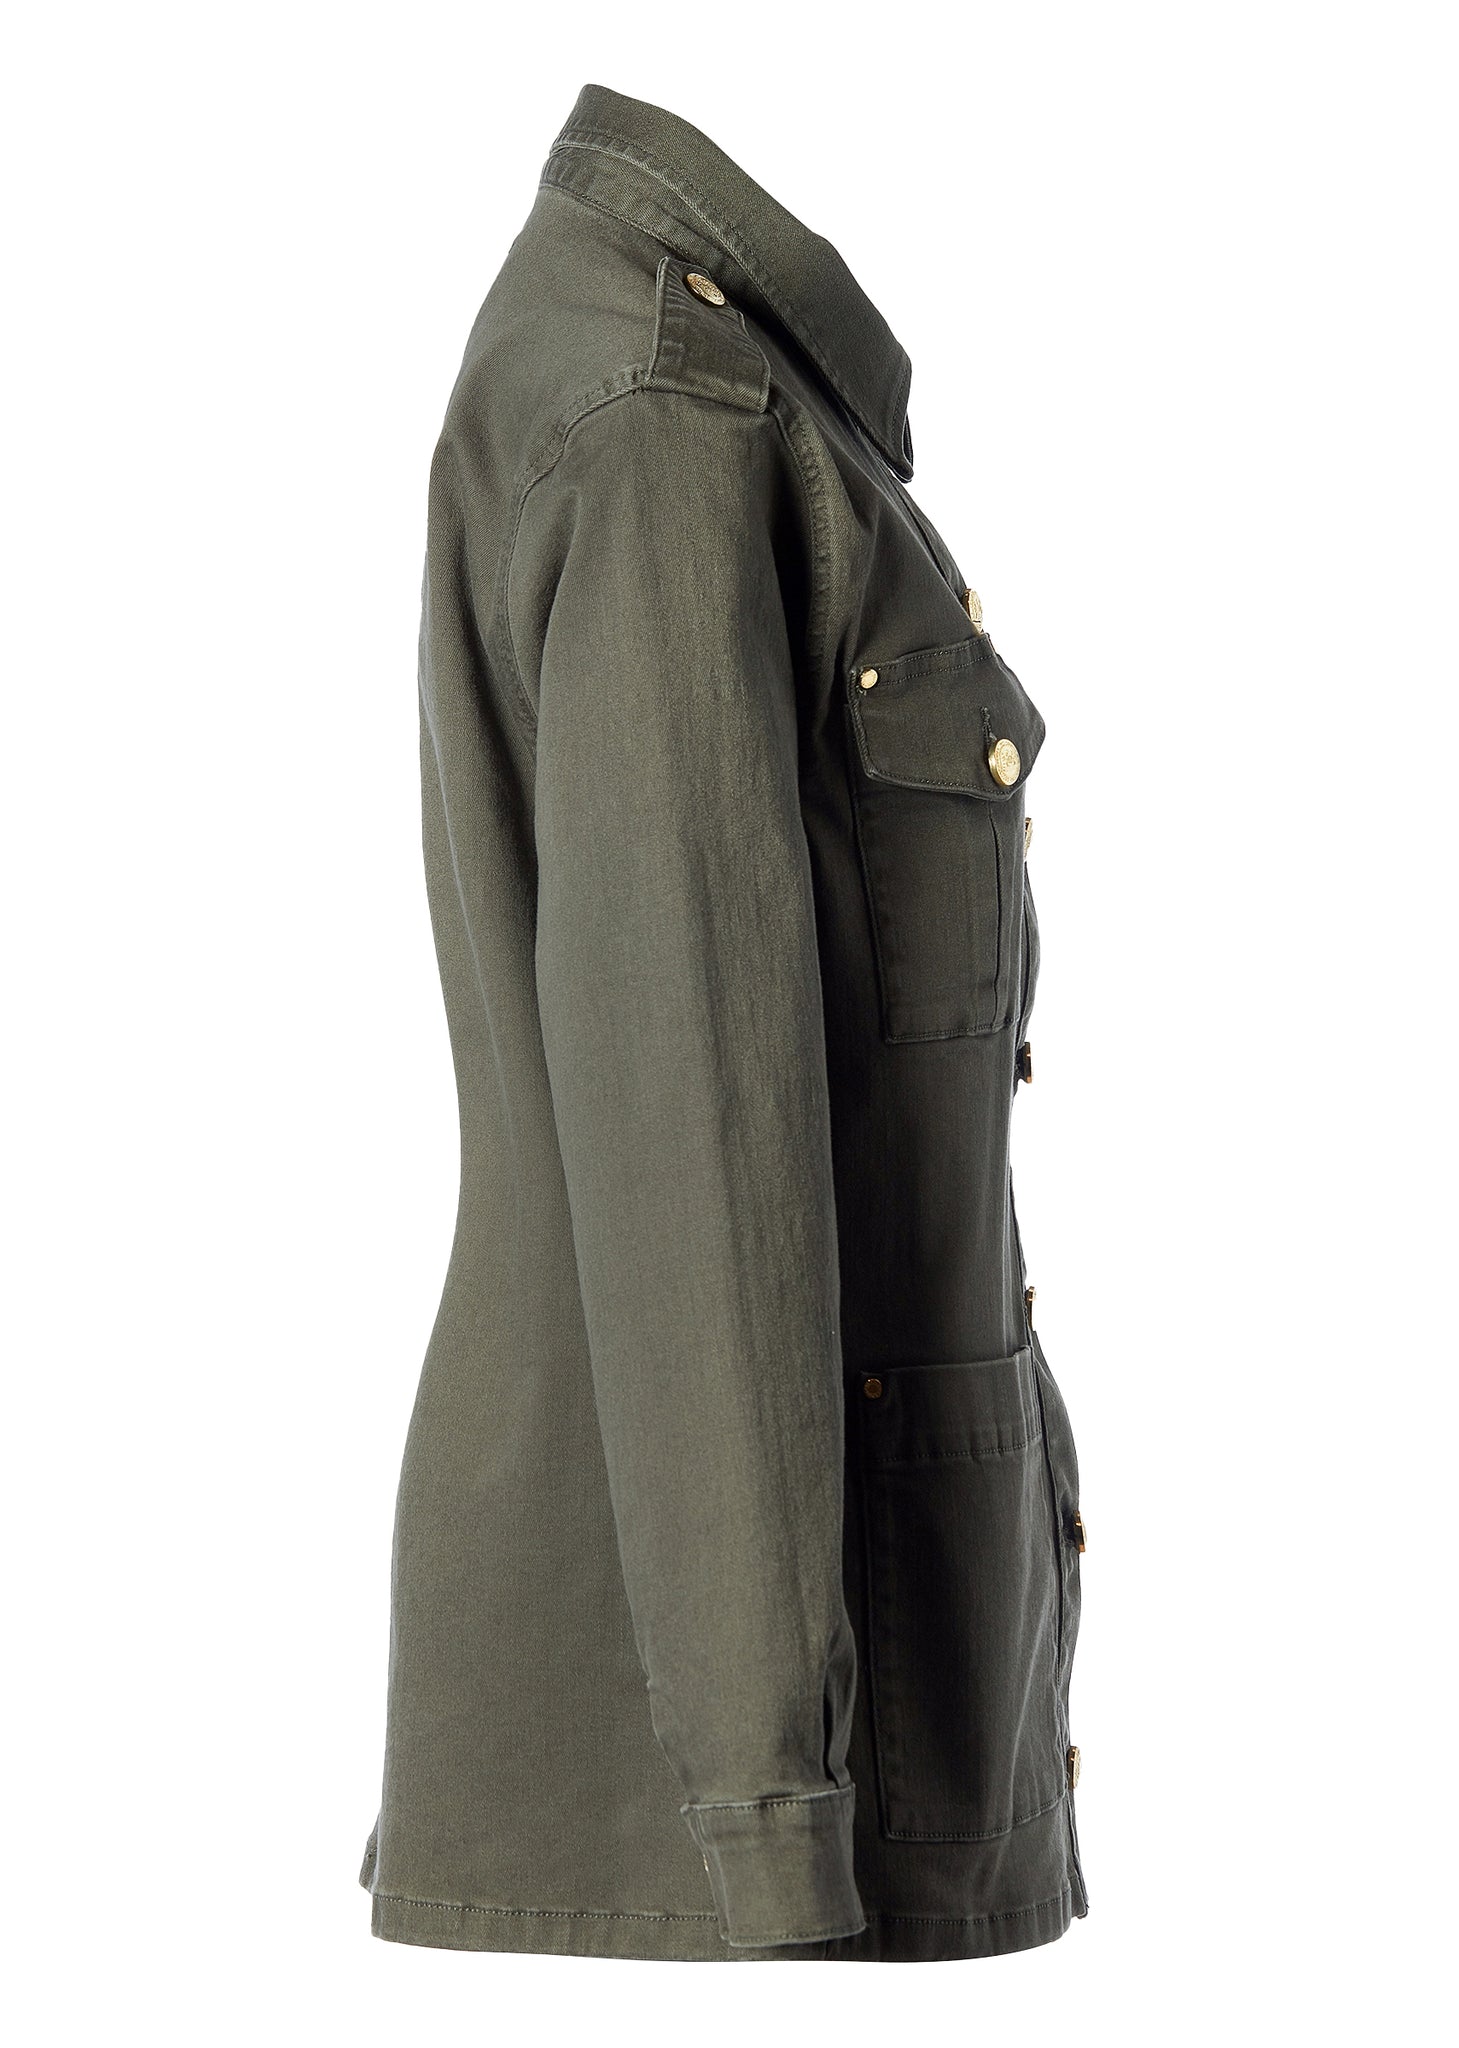 side of Relaxed fit collared artillery style jacket in khaki with four pockets two chest ones being box pleated  and two hip being patch pockets with gold jean button fastenings adjustable long sleeves and epaulette shoulder detail